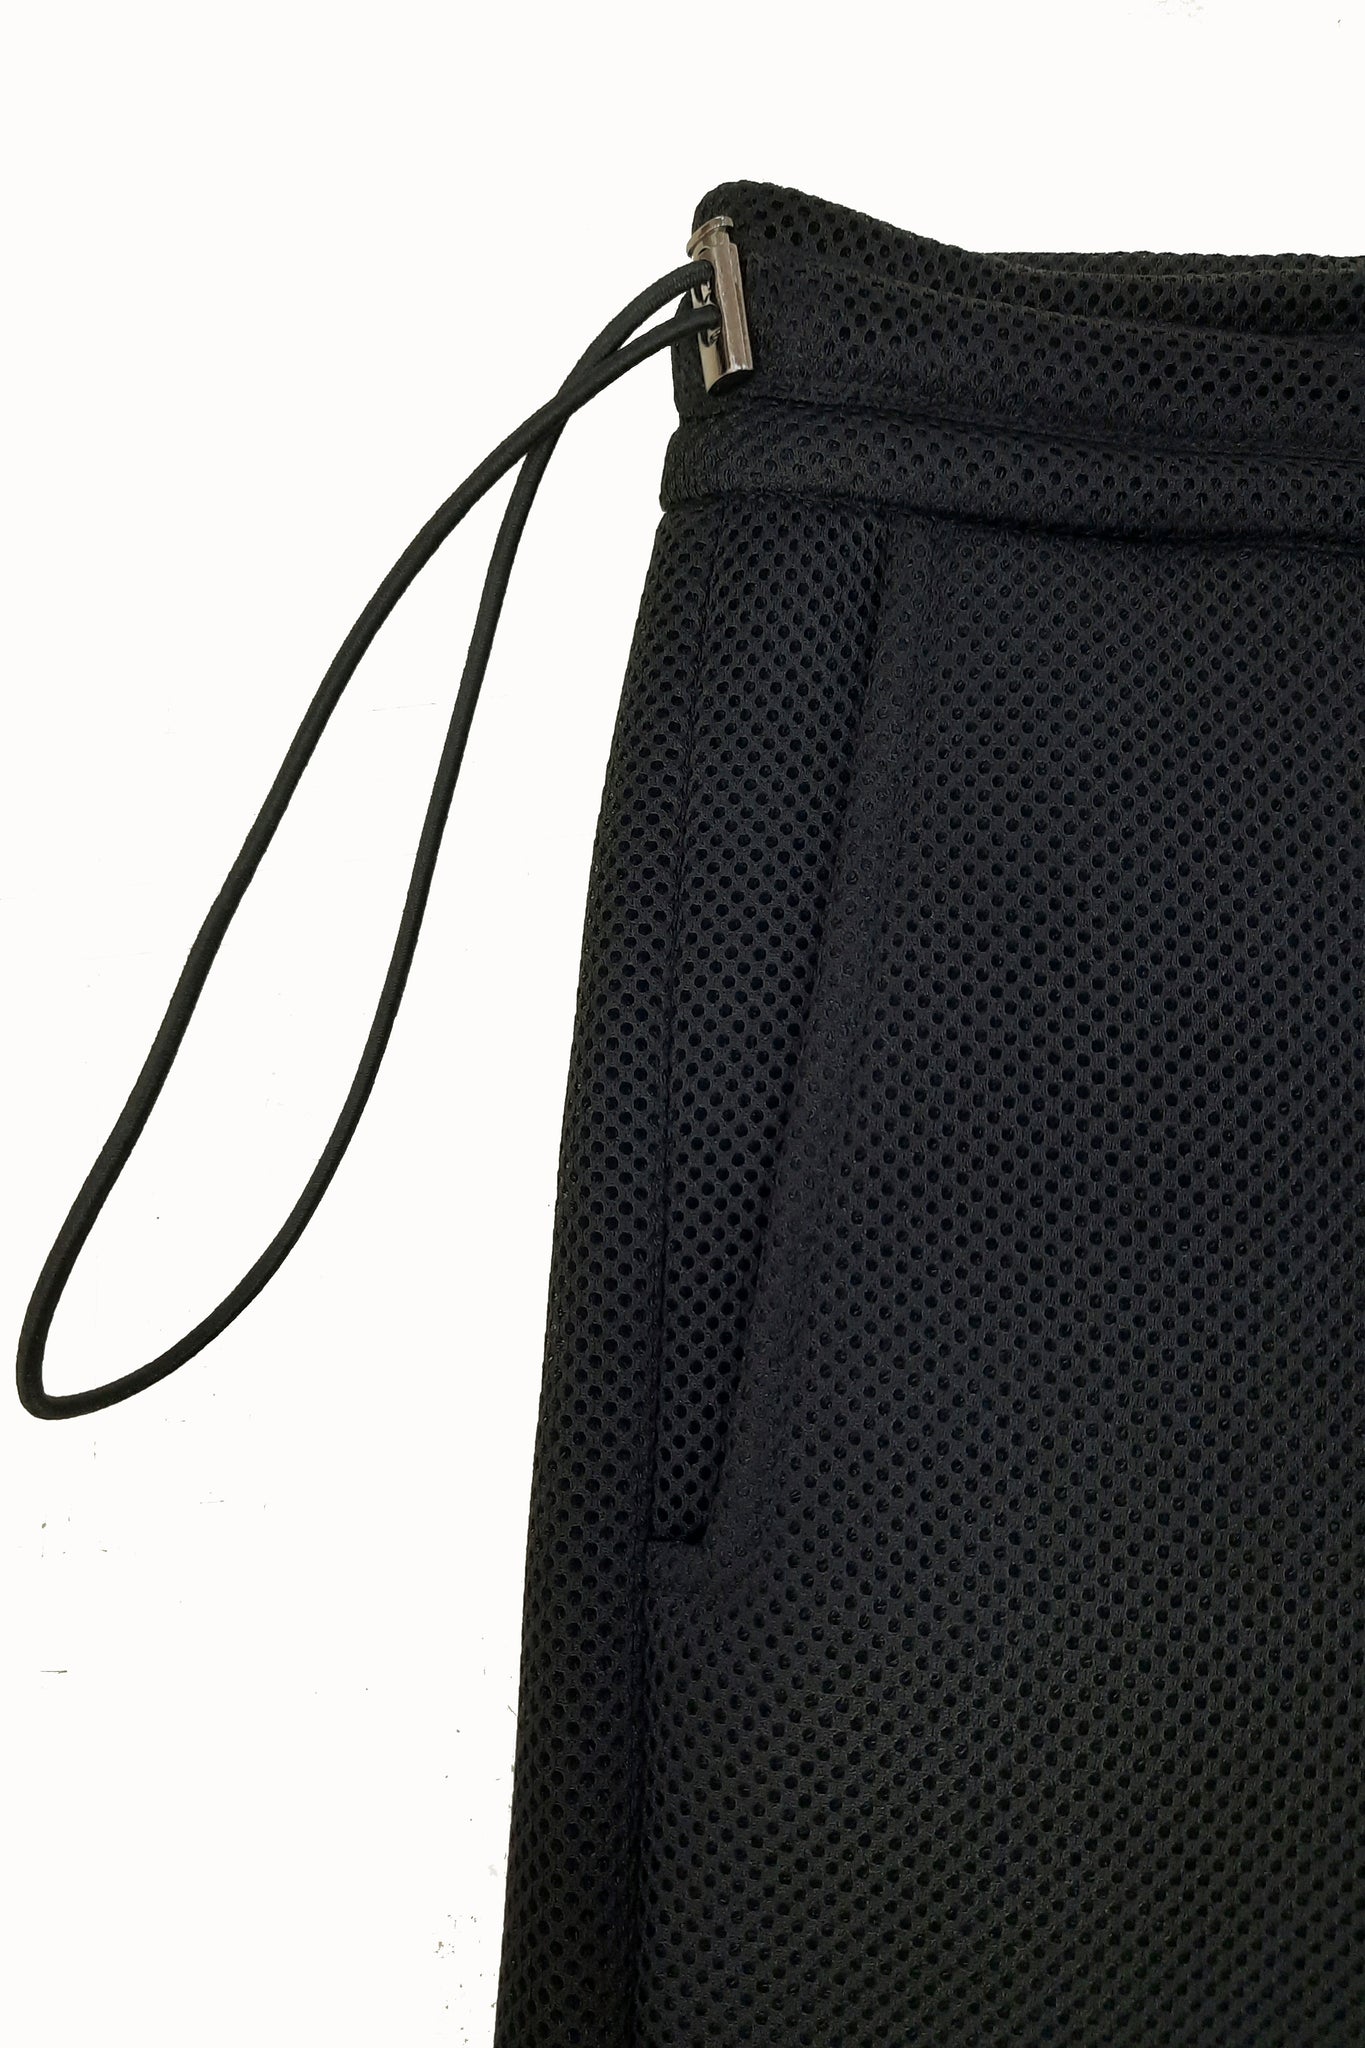  The waistband features adjustable drawstring cords.